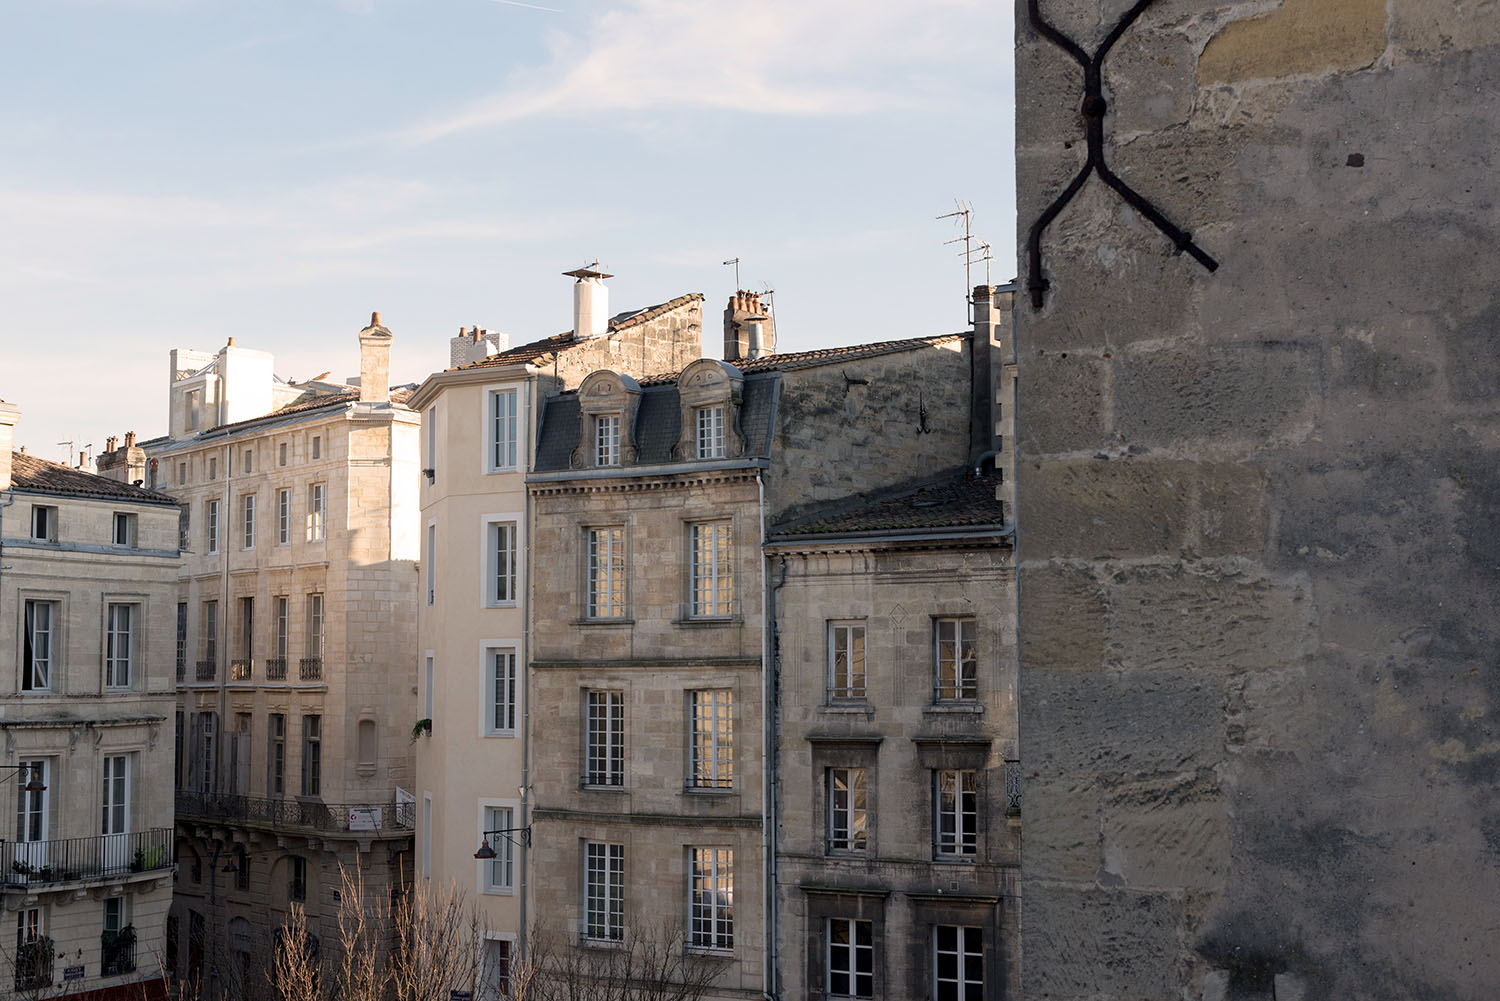 The historic rooftops of Bordeaux just before sunset, as captured by top Canadian travel blogger Cee Fardoe of Coco & Vera